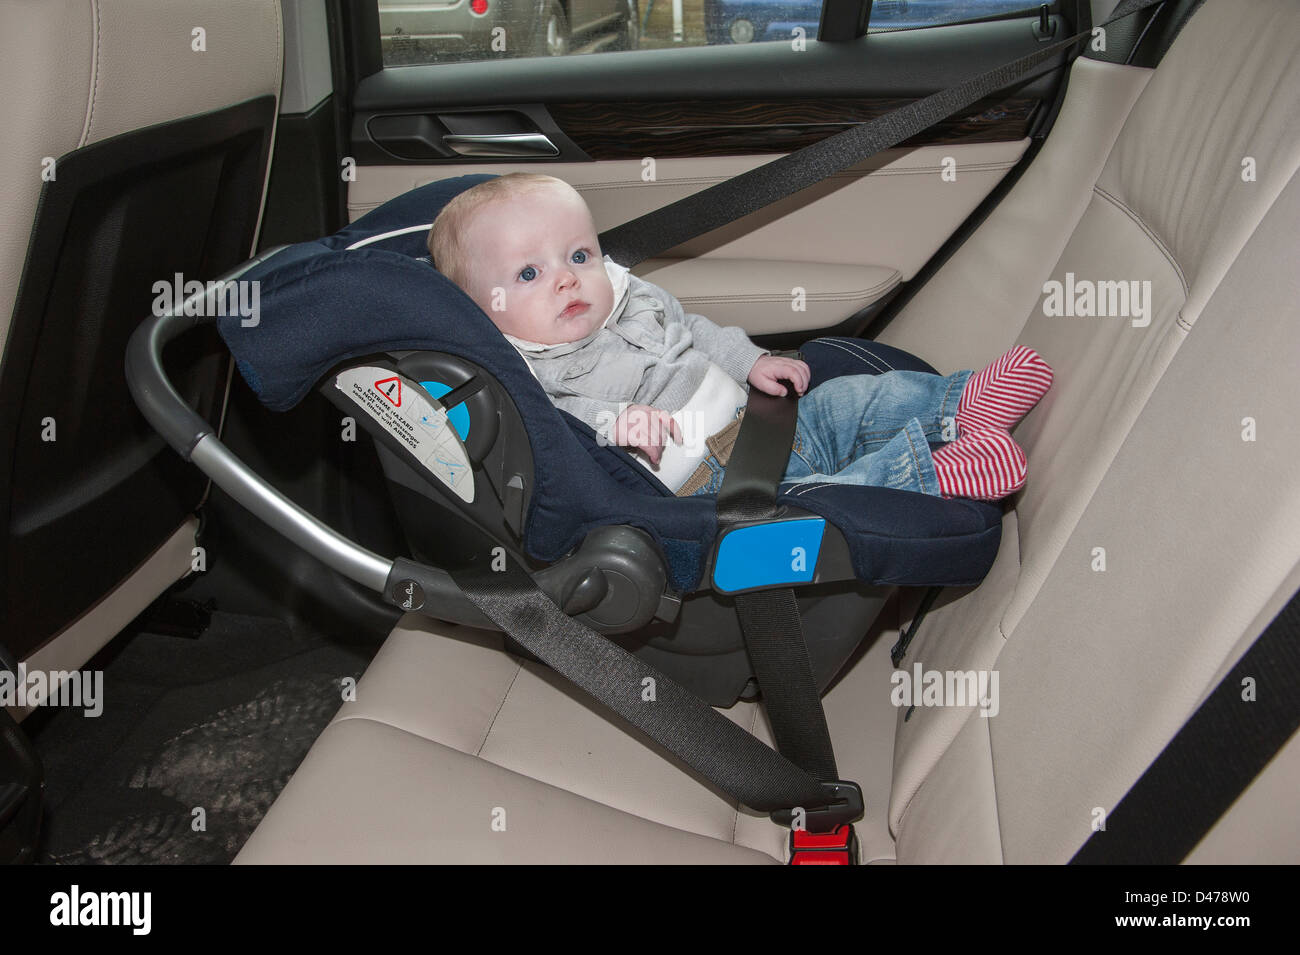 Baby boy sixth months old sitting in a car seat secured with a seatbelt. Stock Photo